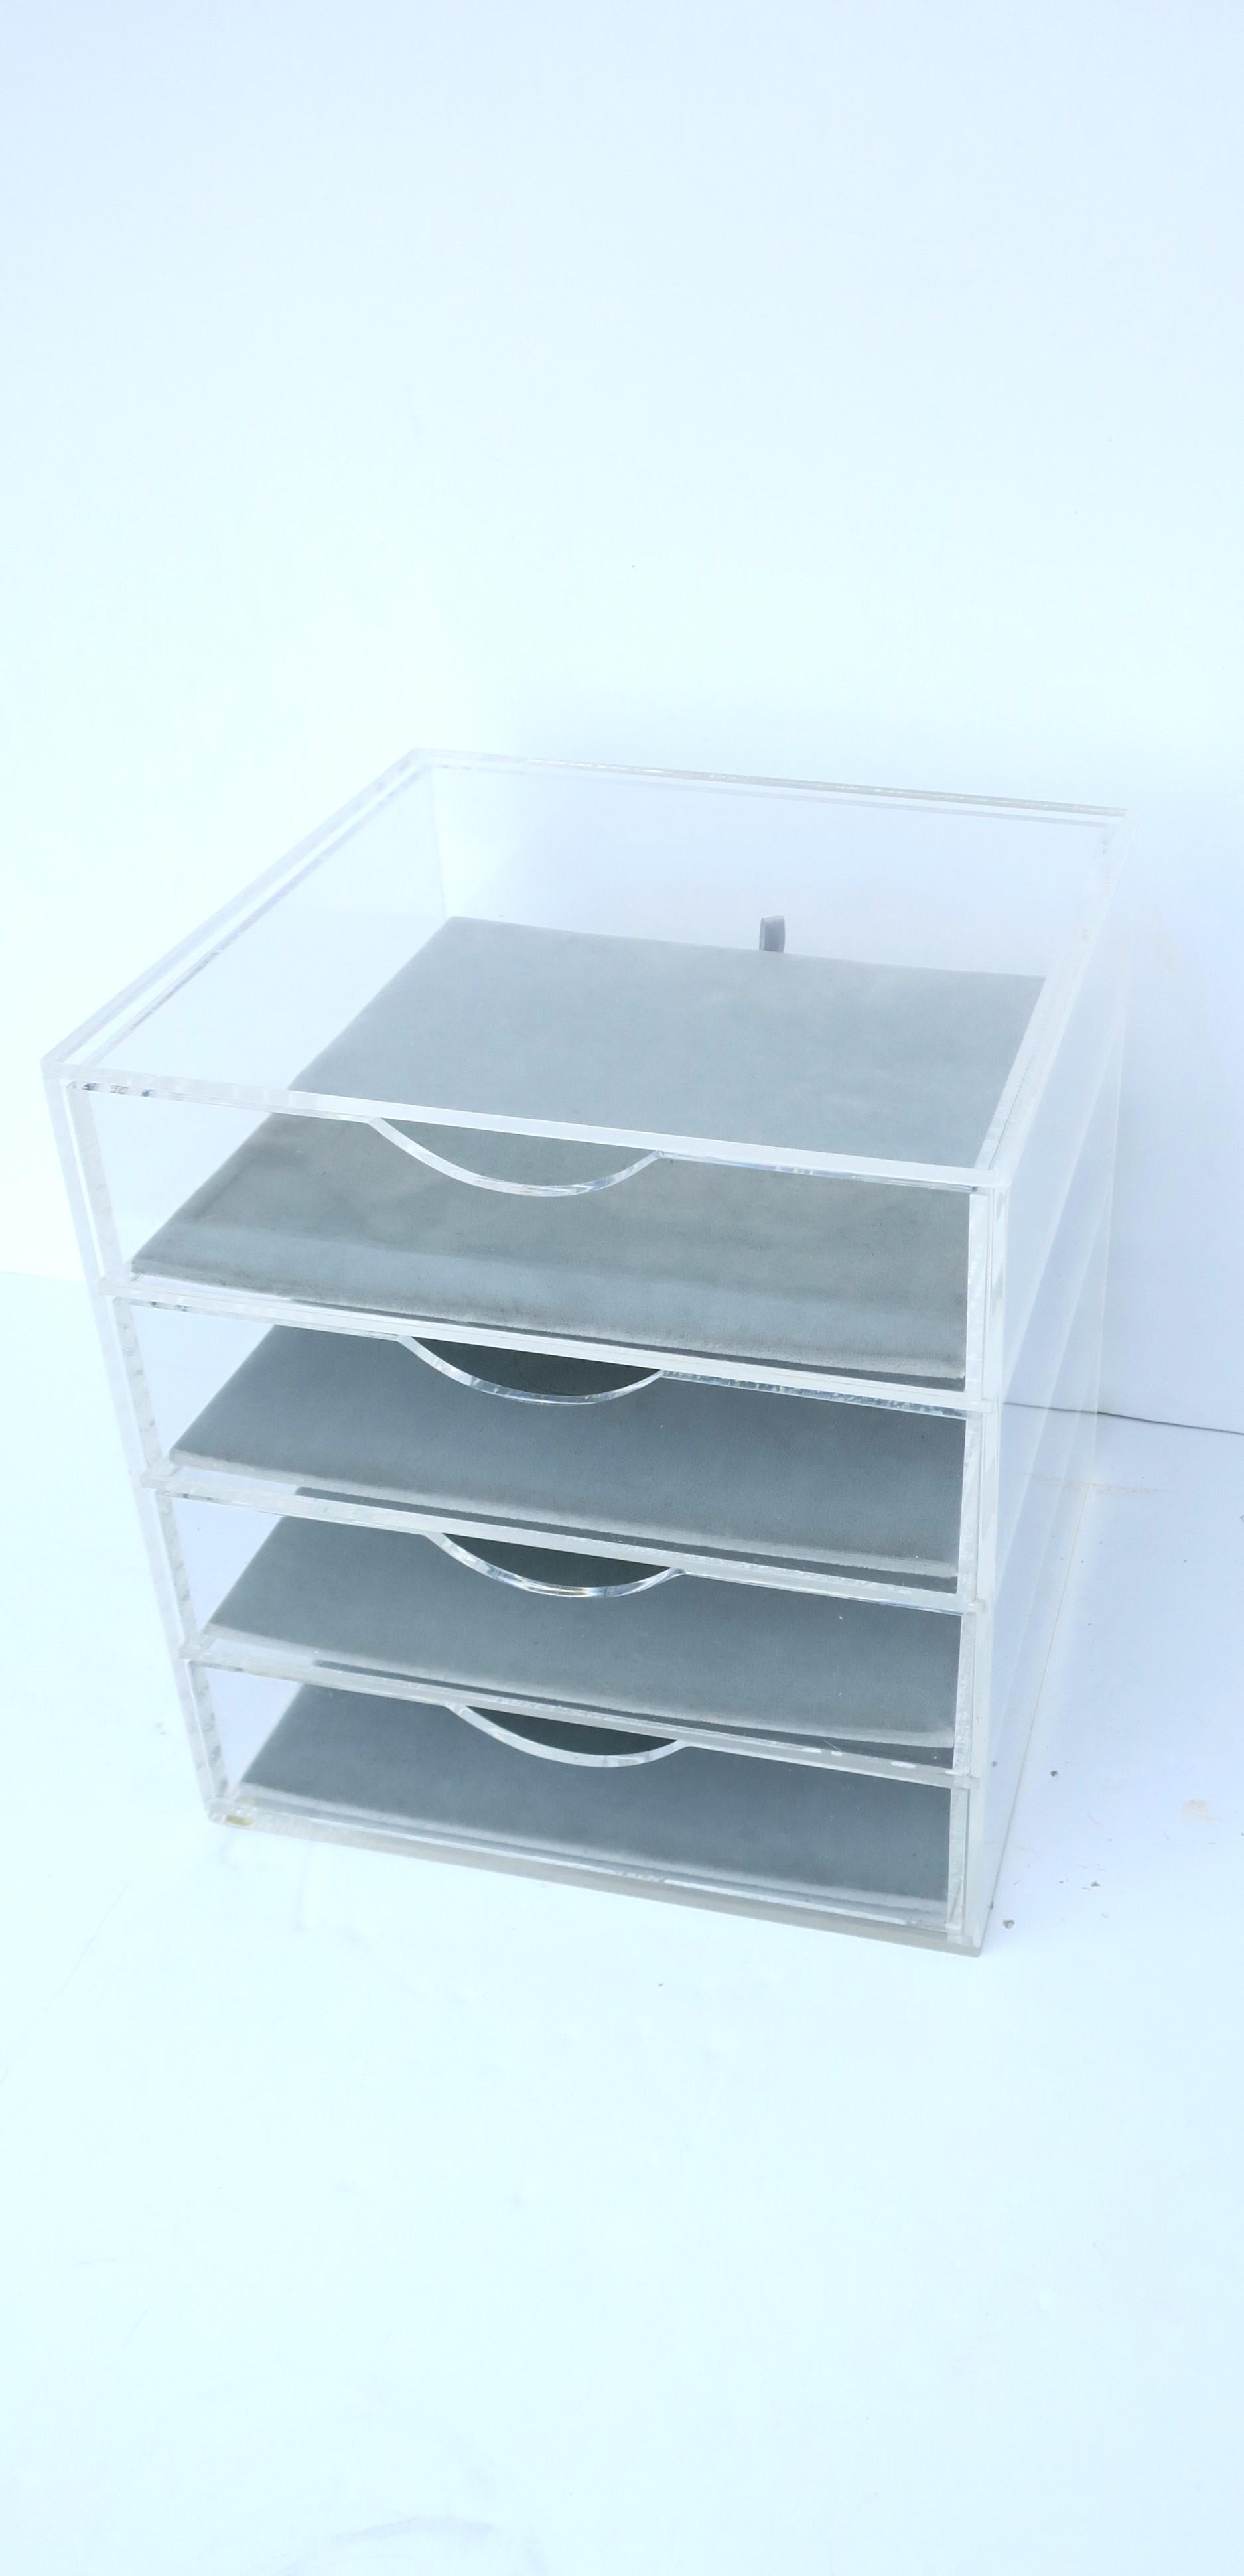 A Lucite and velvet jewelry box with storage draws, in the Modern style, circa late-20th century. Box has ample room with four (4) storage draws lined with removable velvet cushions. Cushions are a light blue/grey blue hue. Draws have an easy